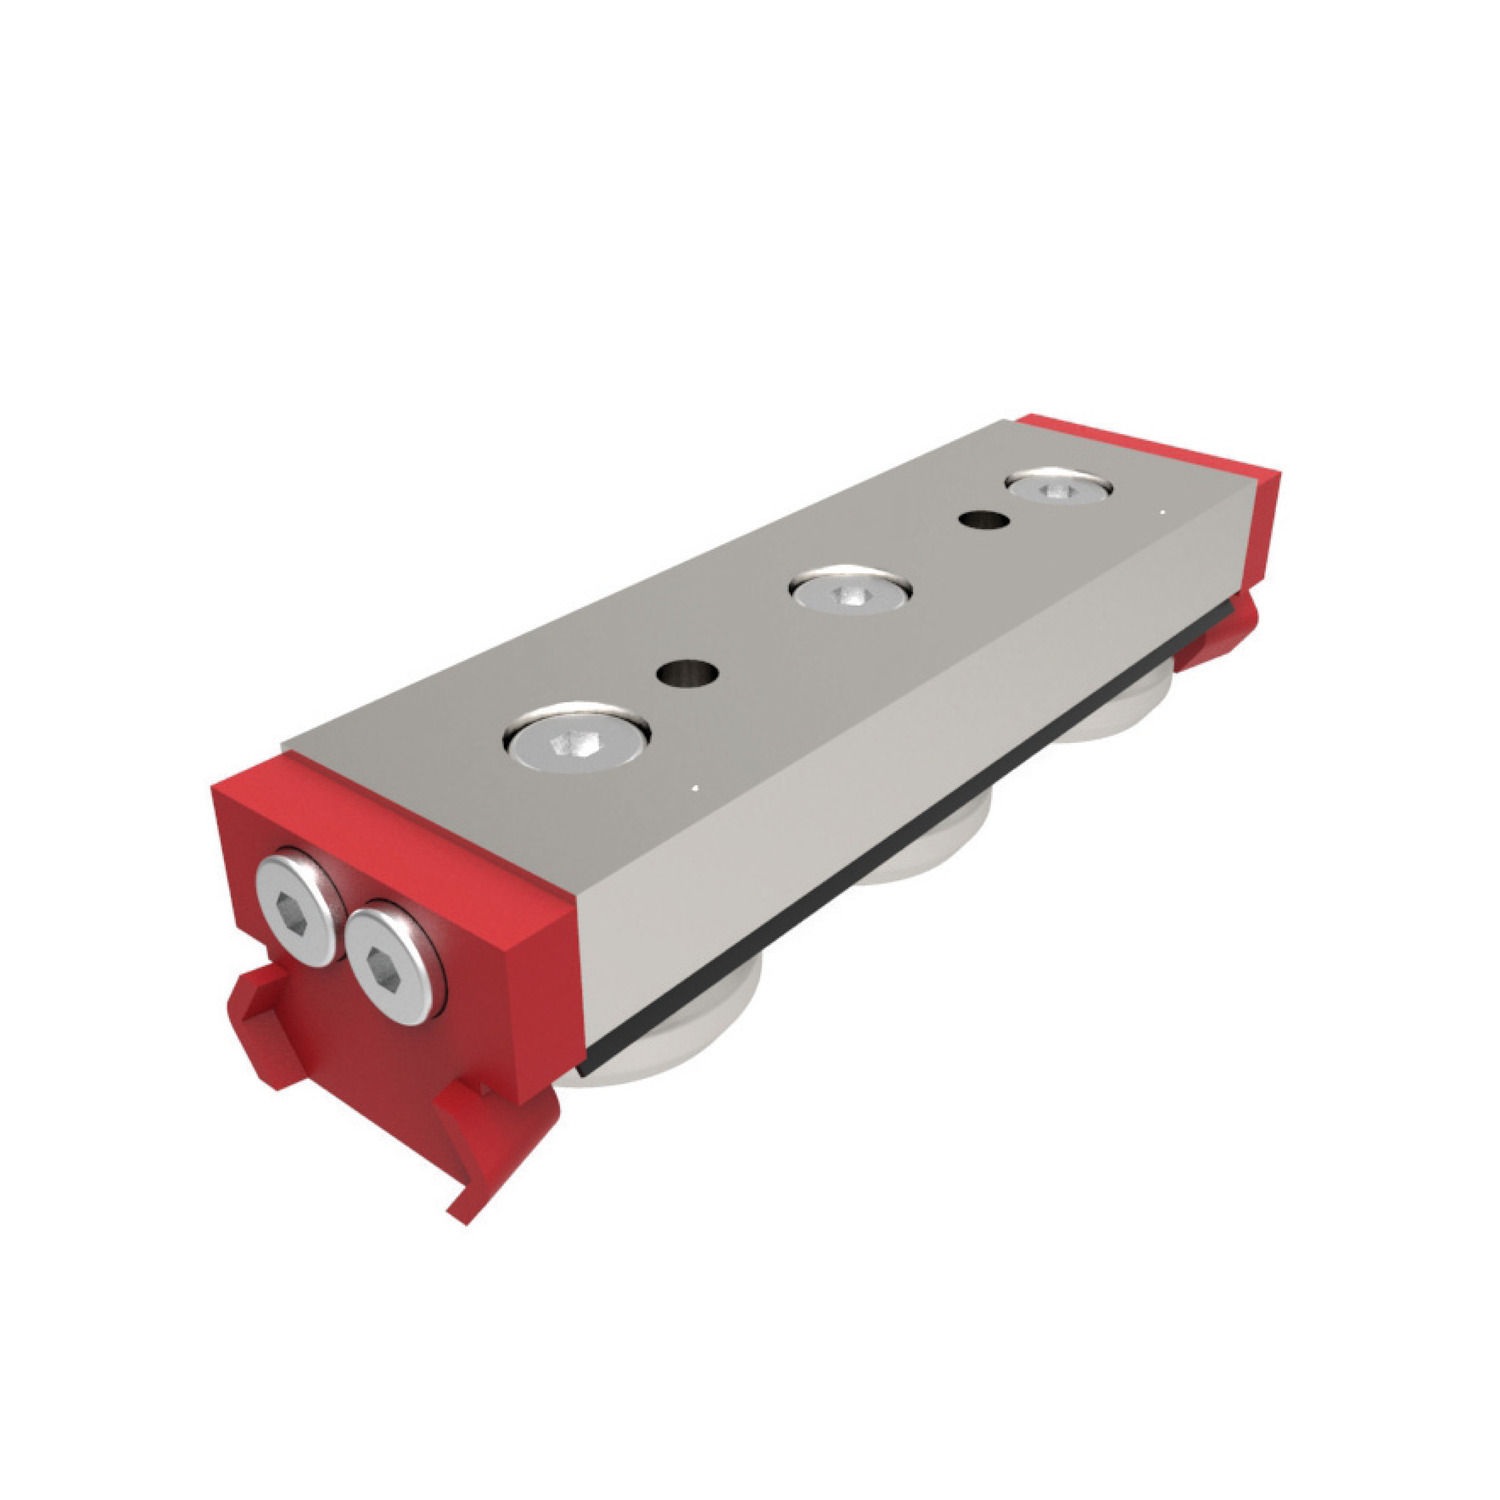 Heavy Duty Sliders - Size 43 Heavy duty compact rail sliders. Front fixing, size 43 with side seal.